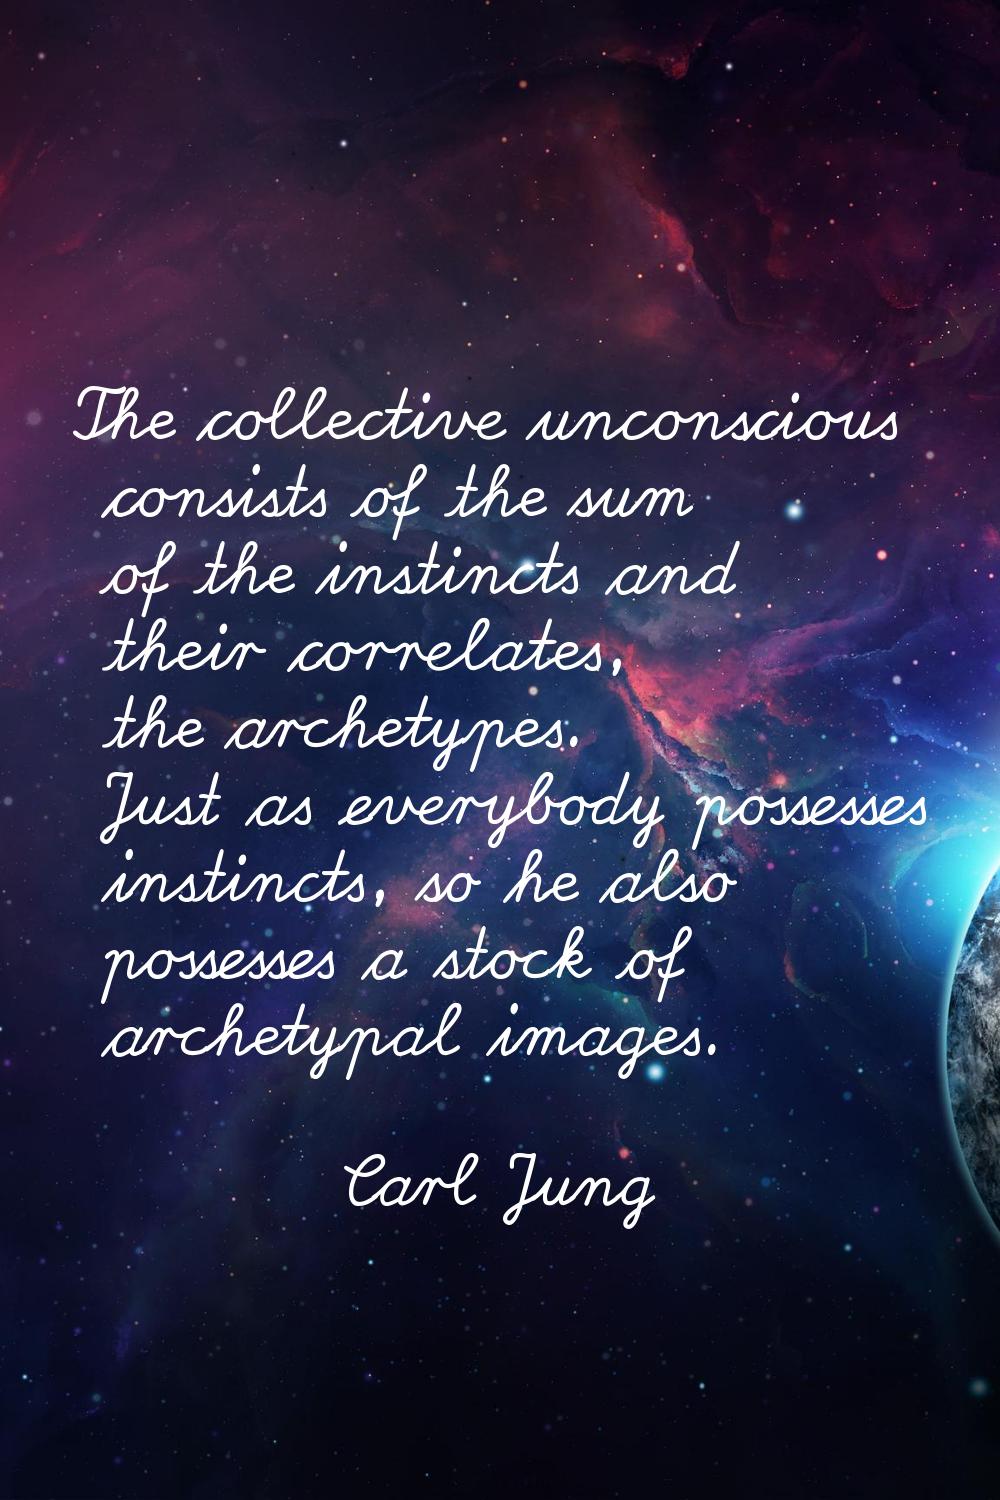 The collective unconscious consists of the sum of the instincts and their correlates, the archetype